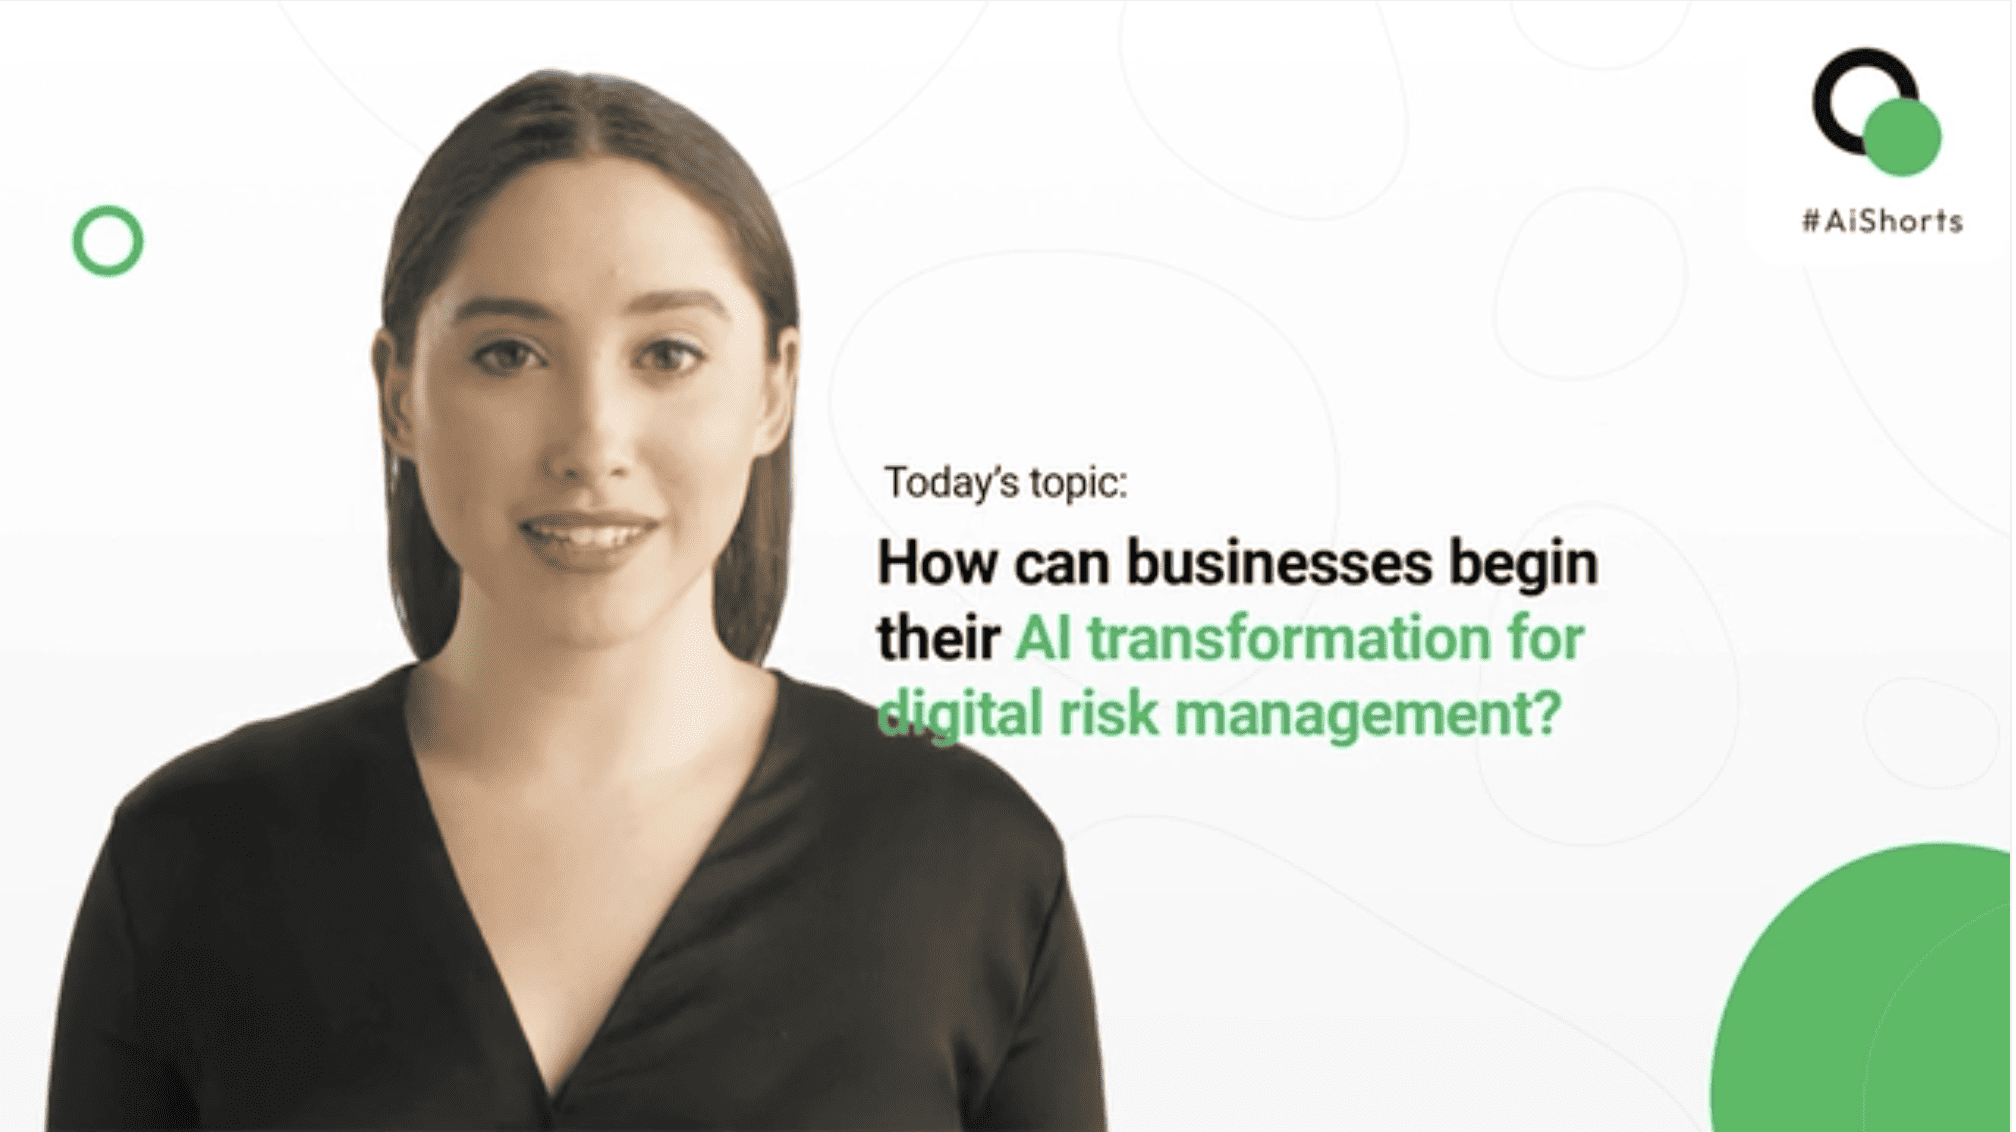 How can businesses begin their AI transformation for digital risk management